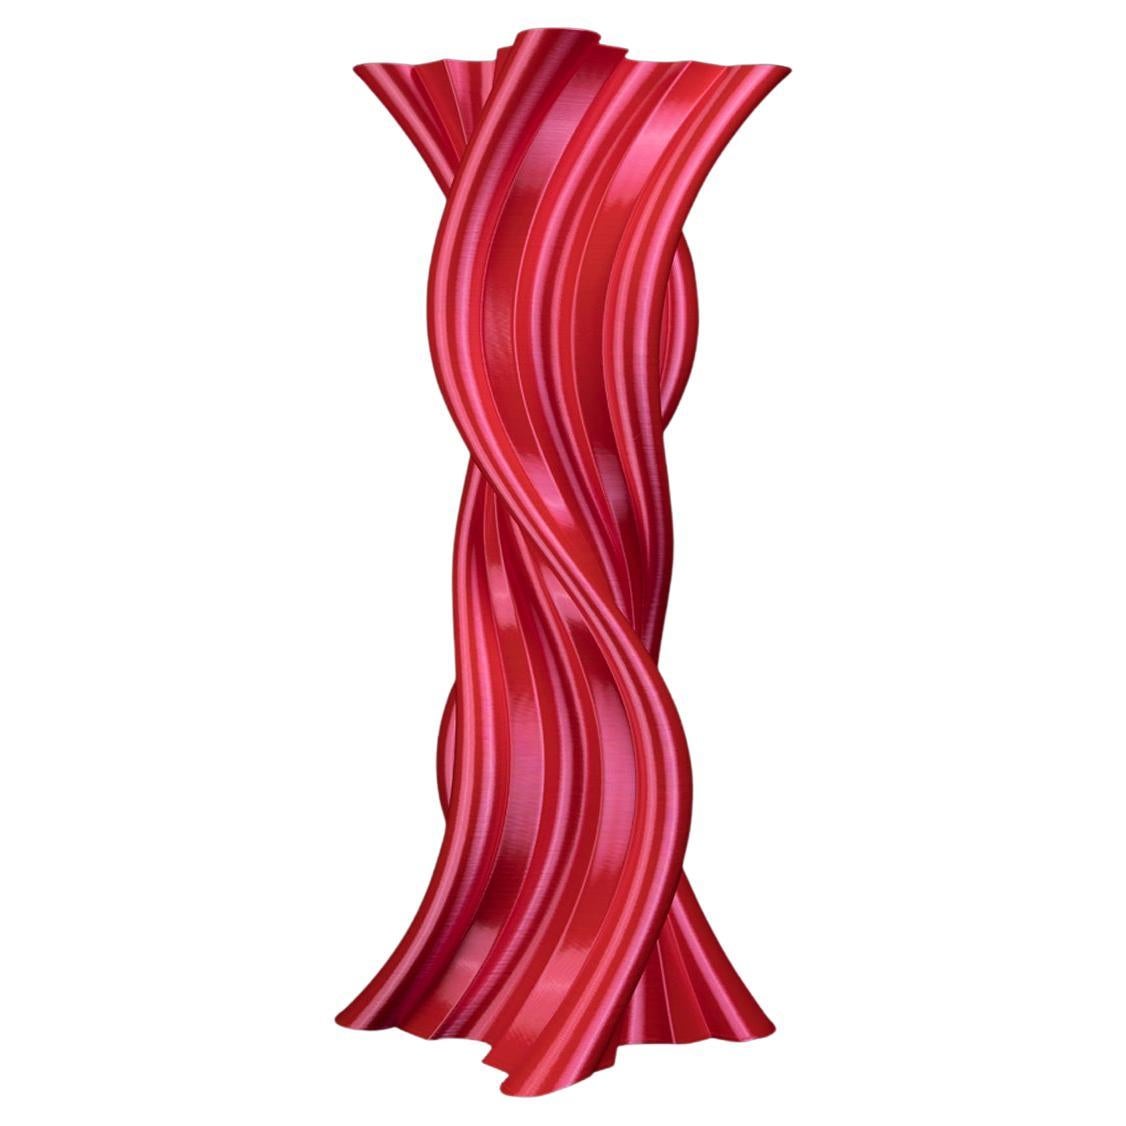 Tersicore, Red Contemporary Sustainable Vase-Sculpture For Sale